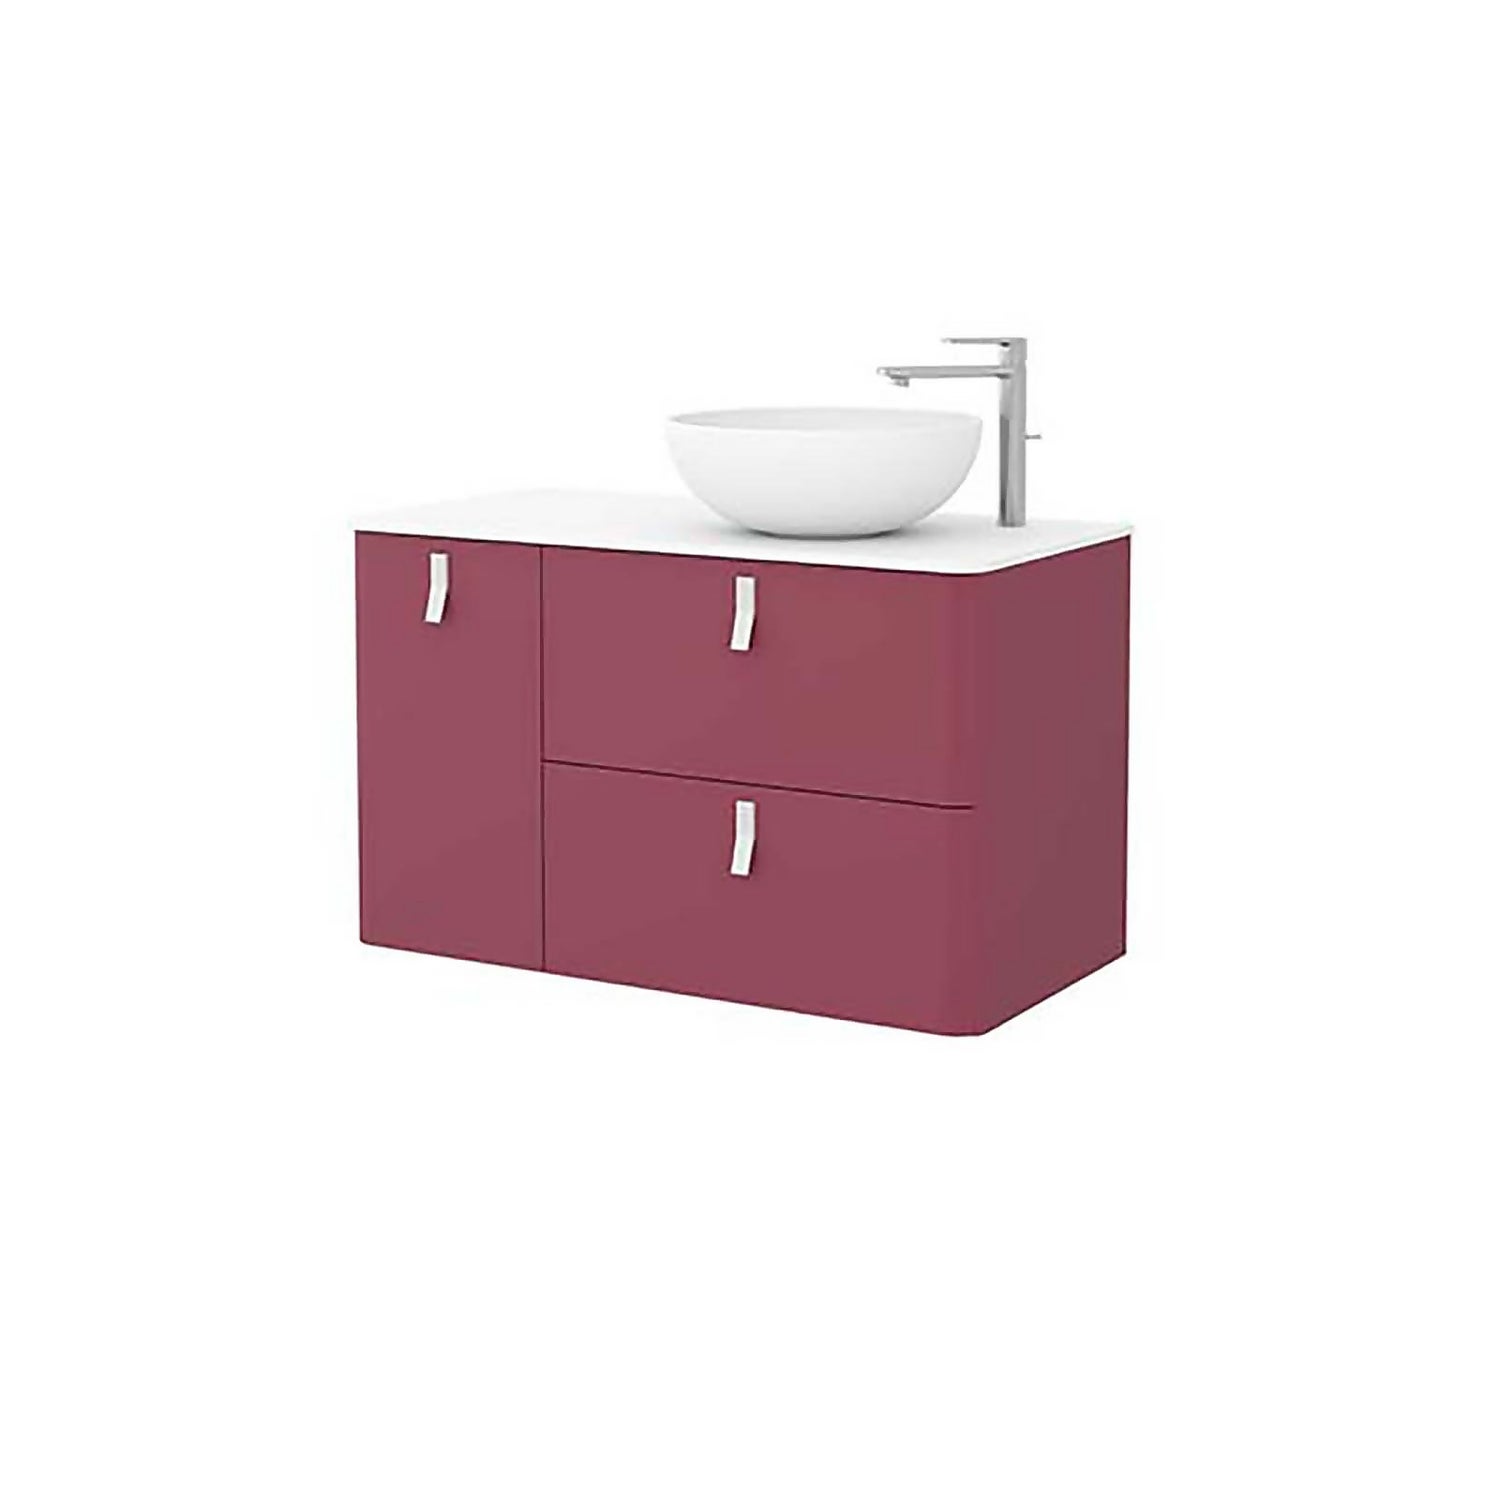 Sketch 900mm Left Hand Wash Bowl and Unit - Pomegranate Red